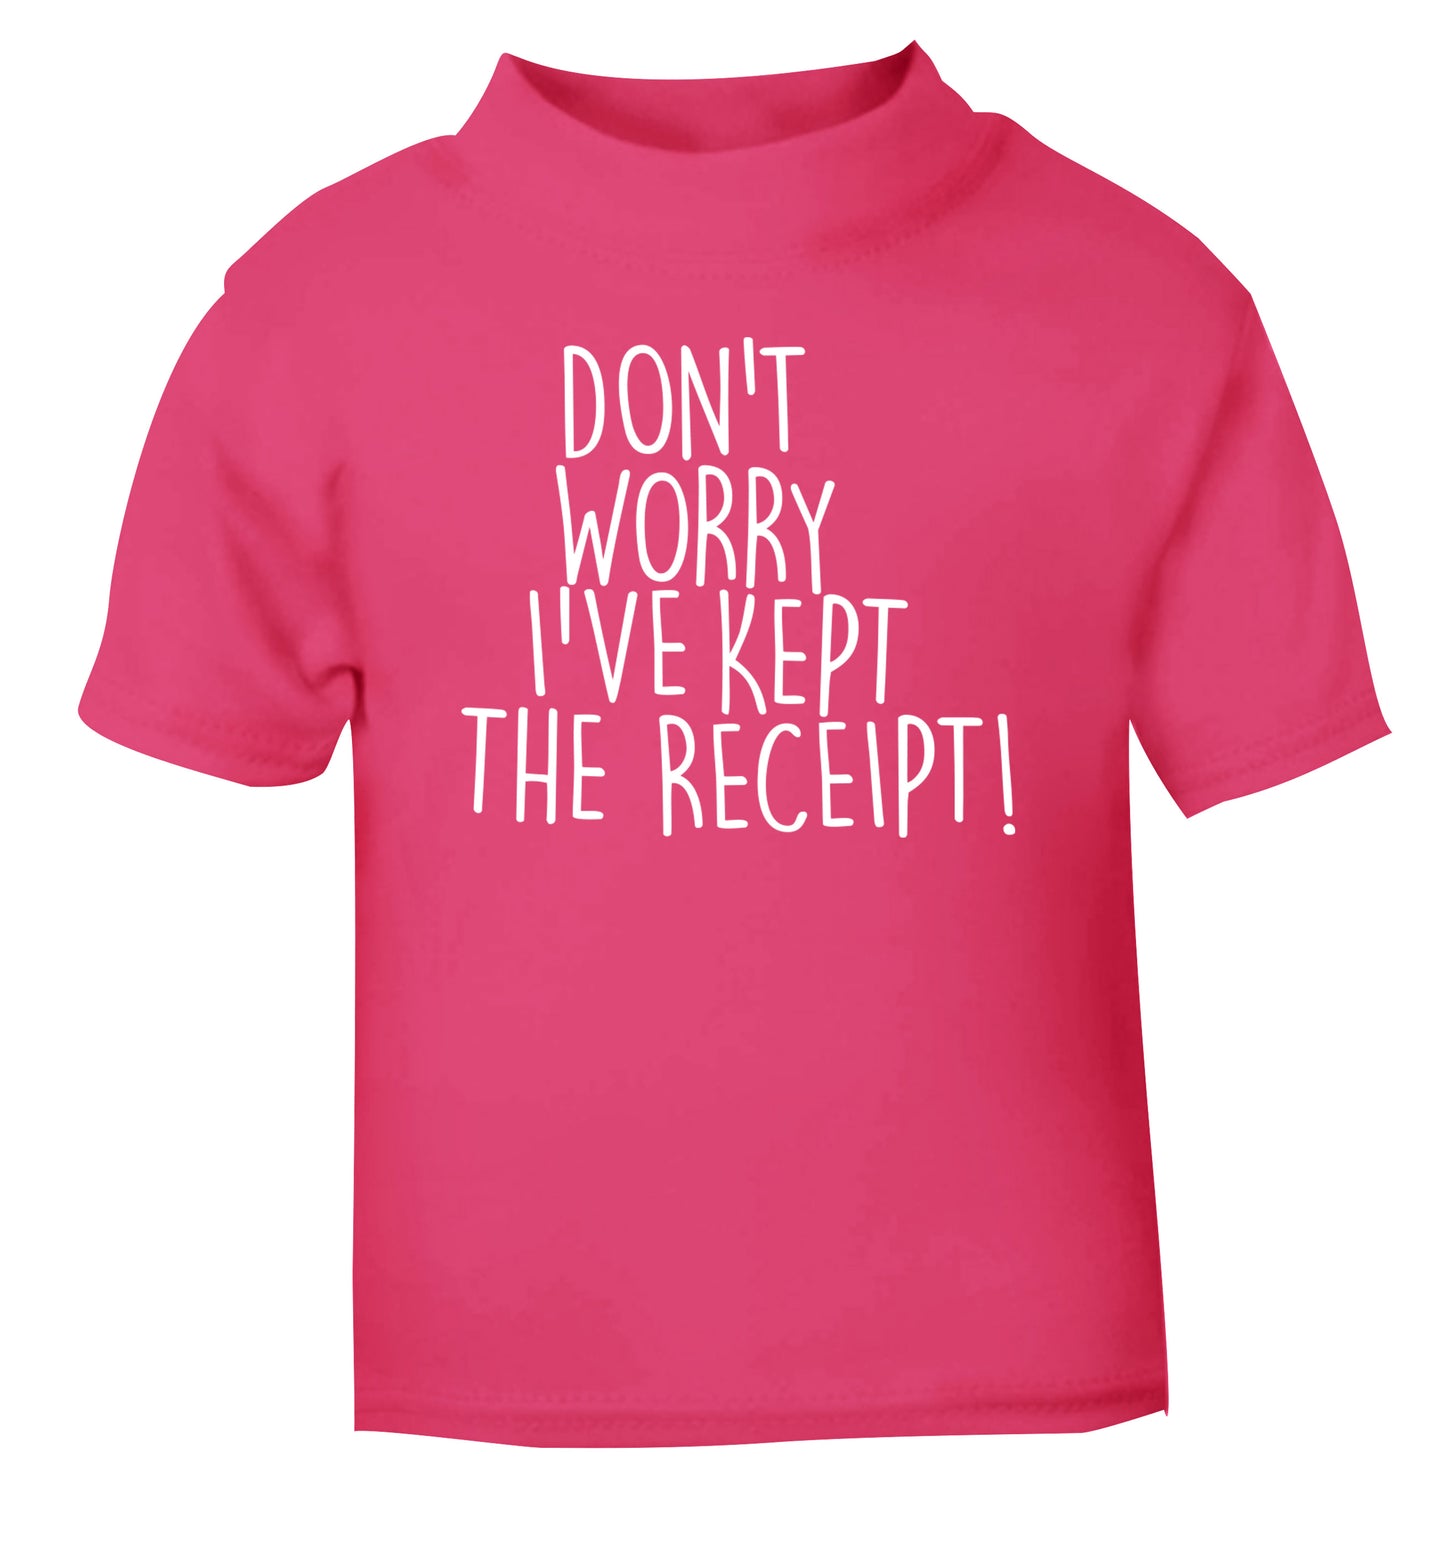 Don't Worry I've Kept the Receipt pink Baby Toddler Tshirt 2 Years